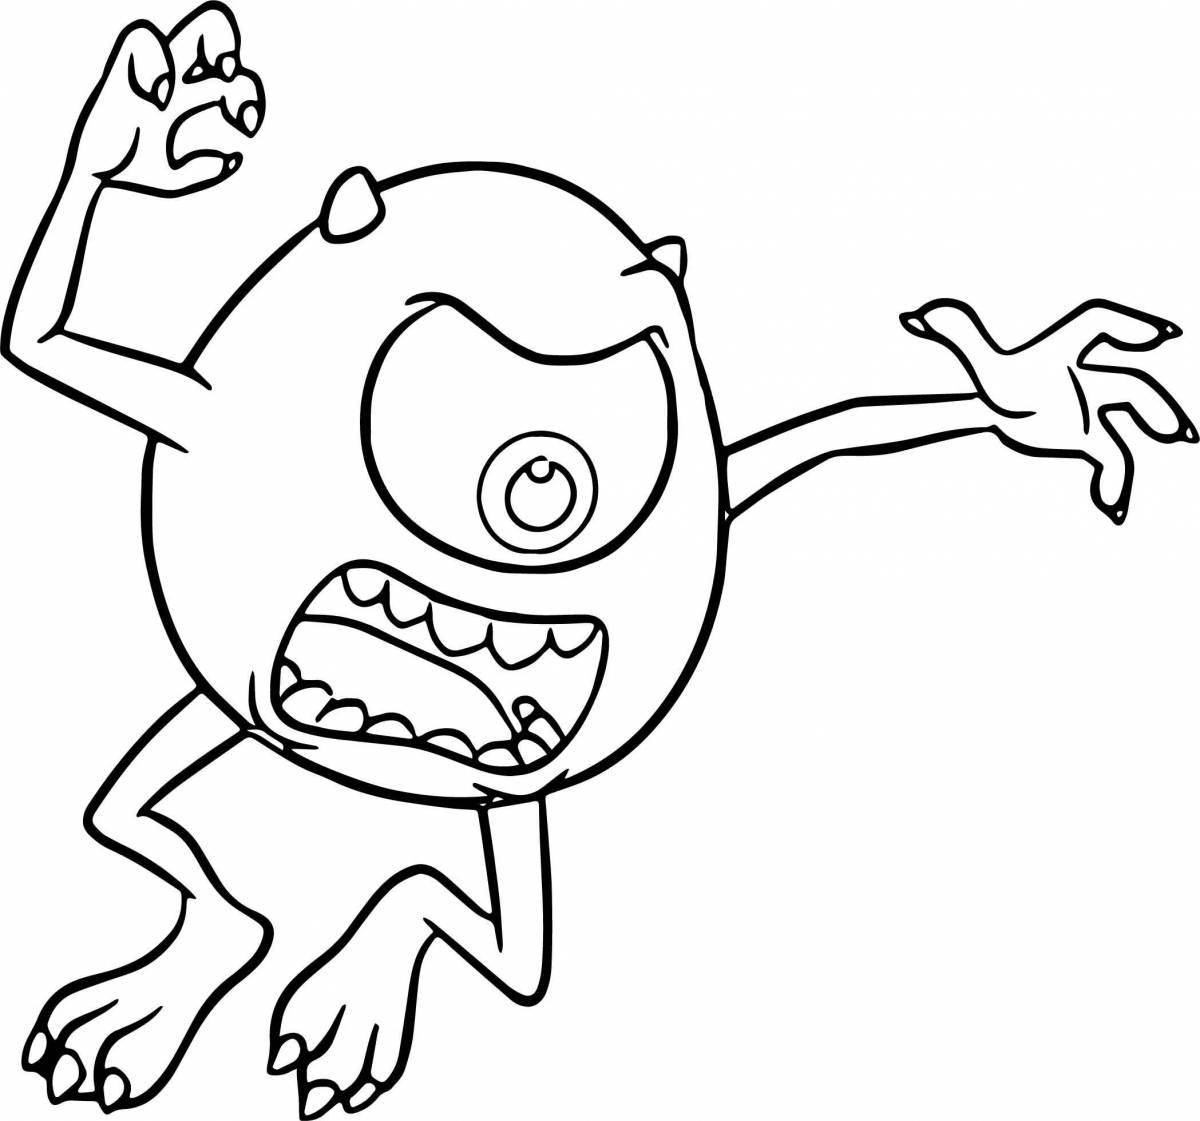 Smiling plush monster coloring page